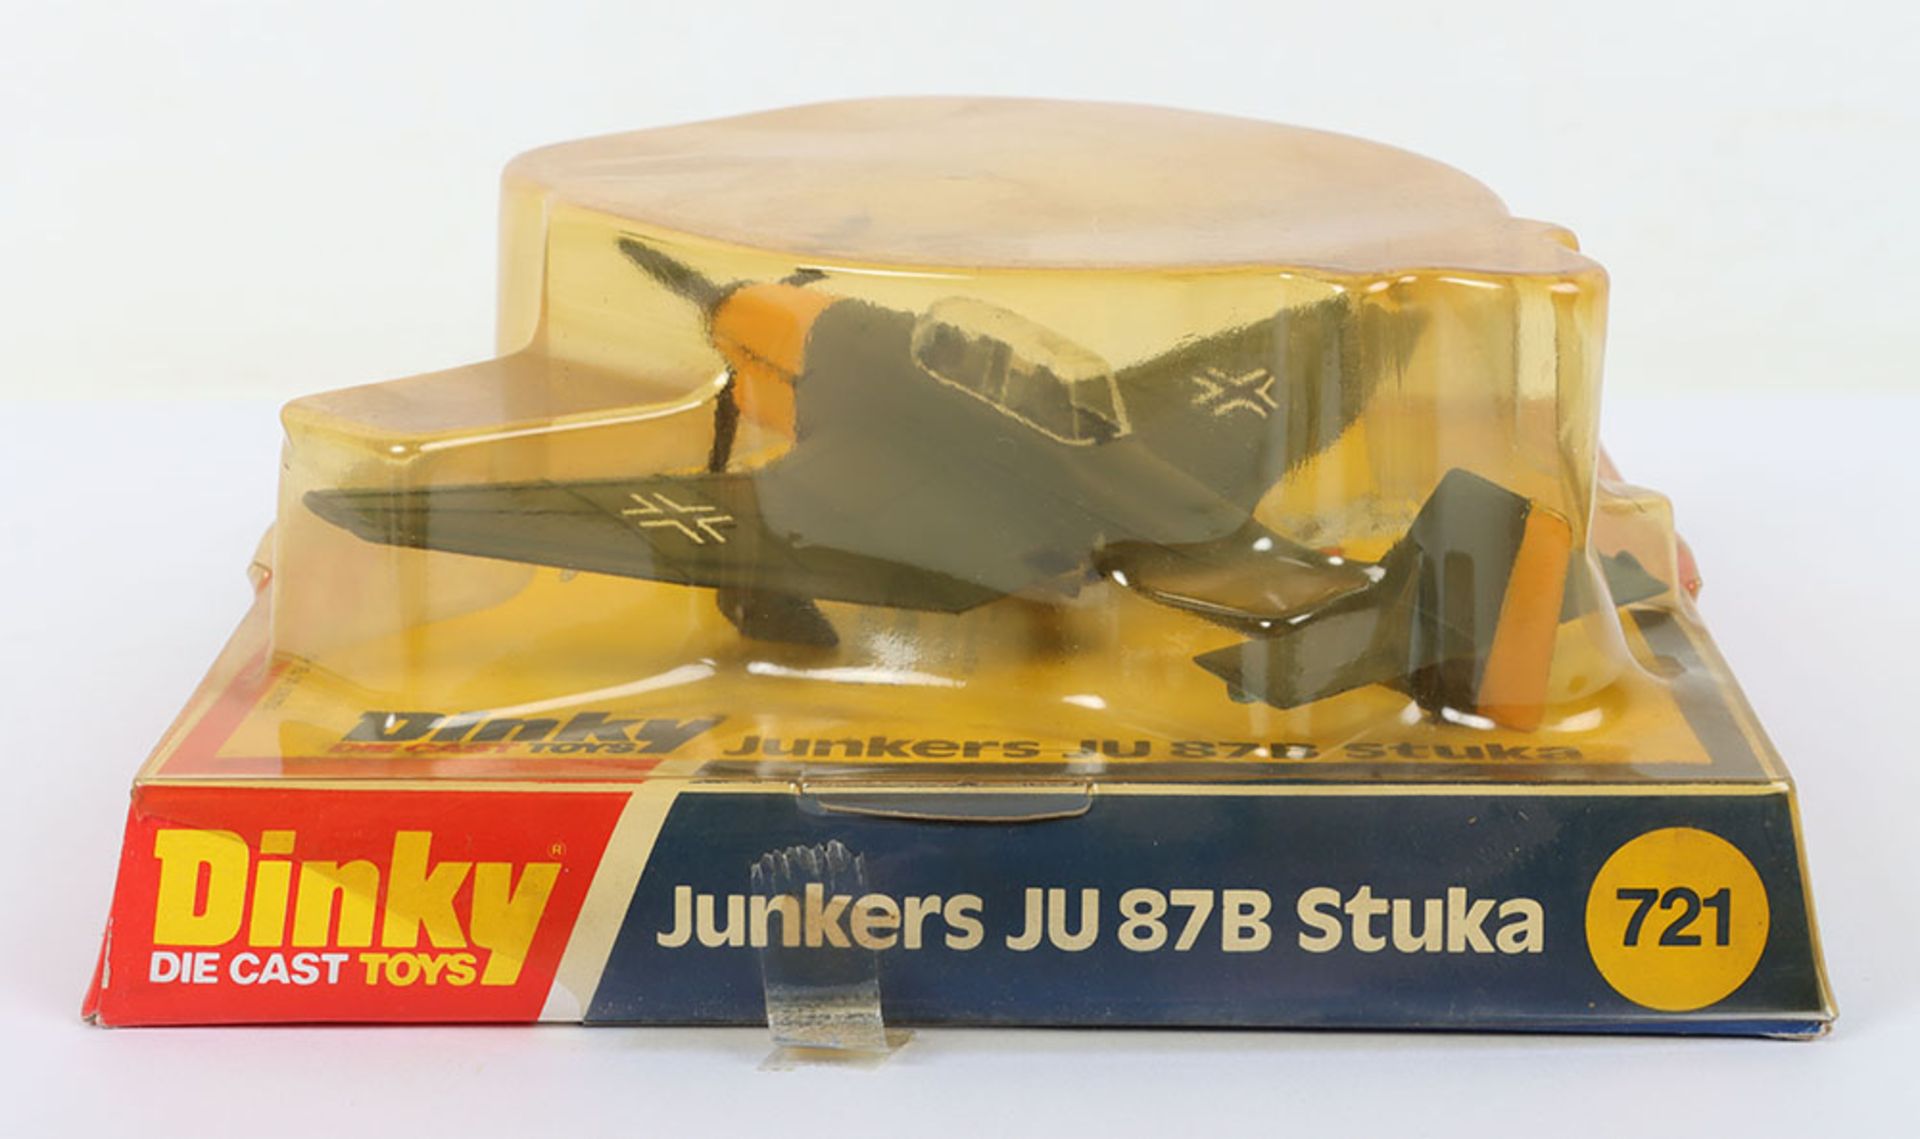 Dinky Toys 721 German Junkers Ju 87B Stuka Aircraft with dropping cap firing bomb! - Image 3 of 5